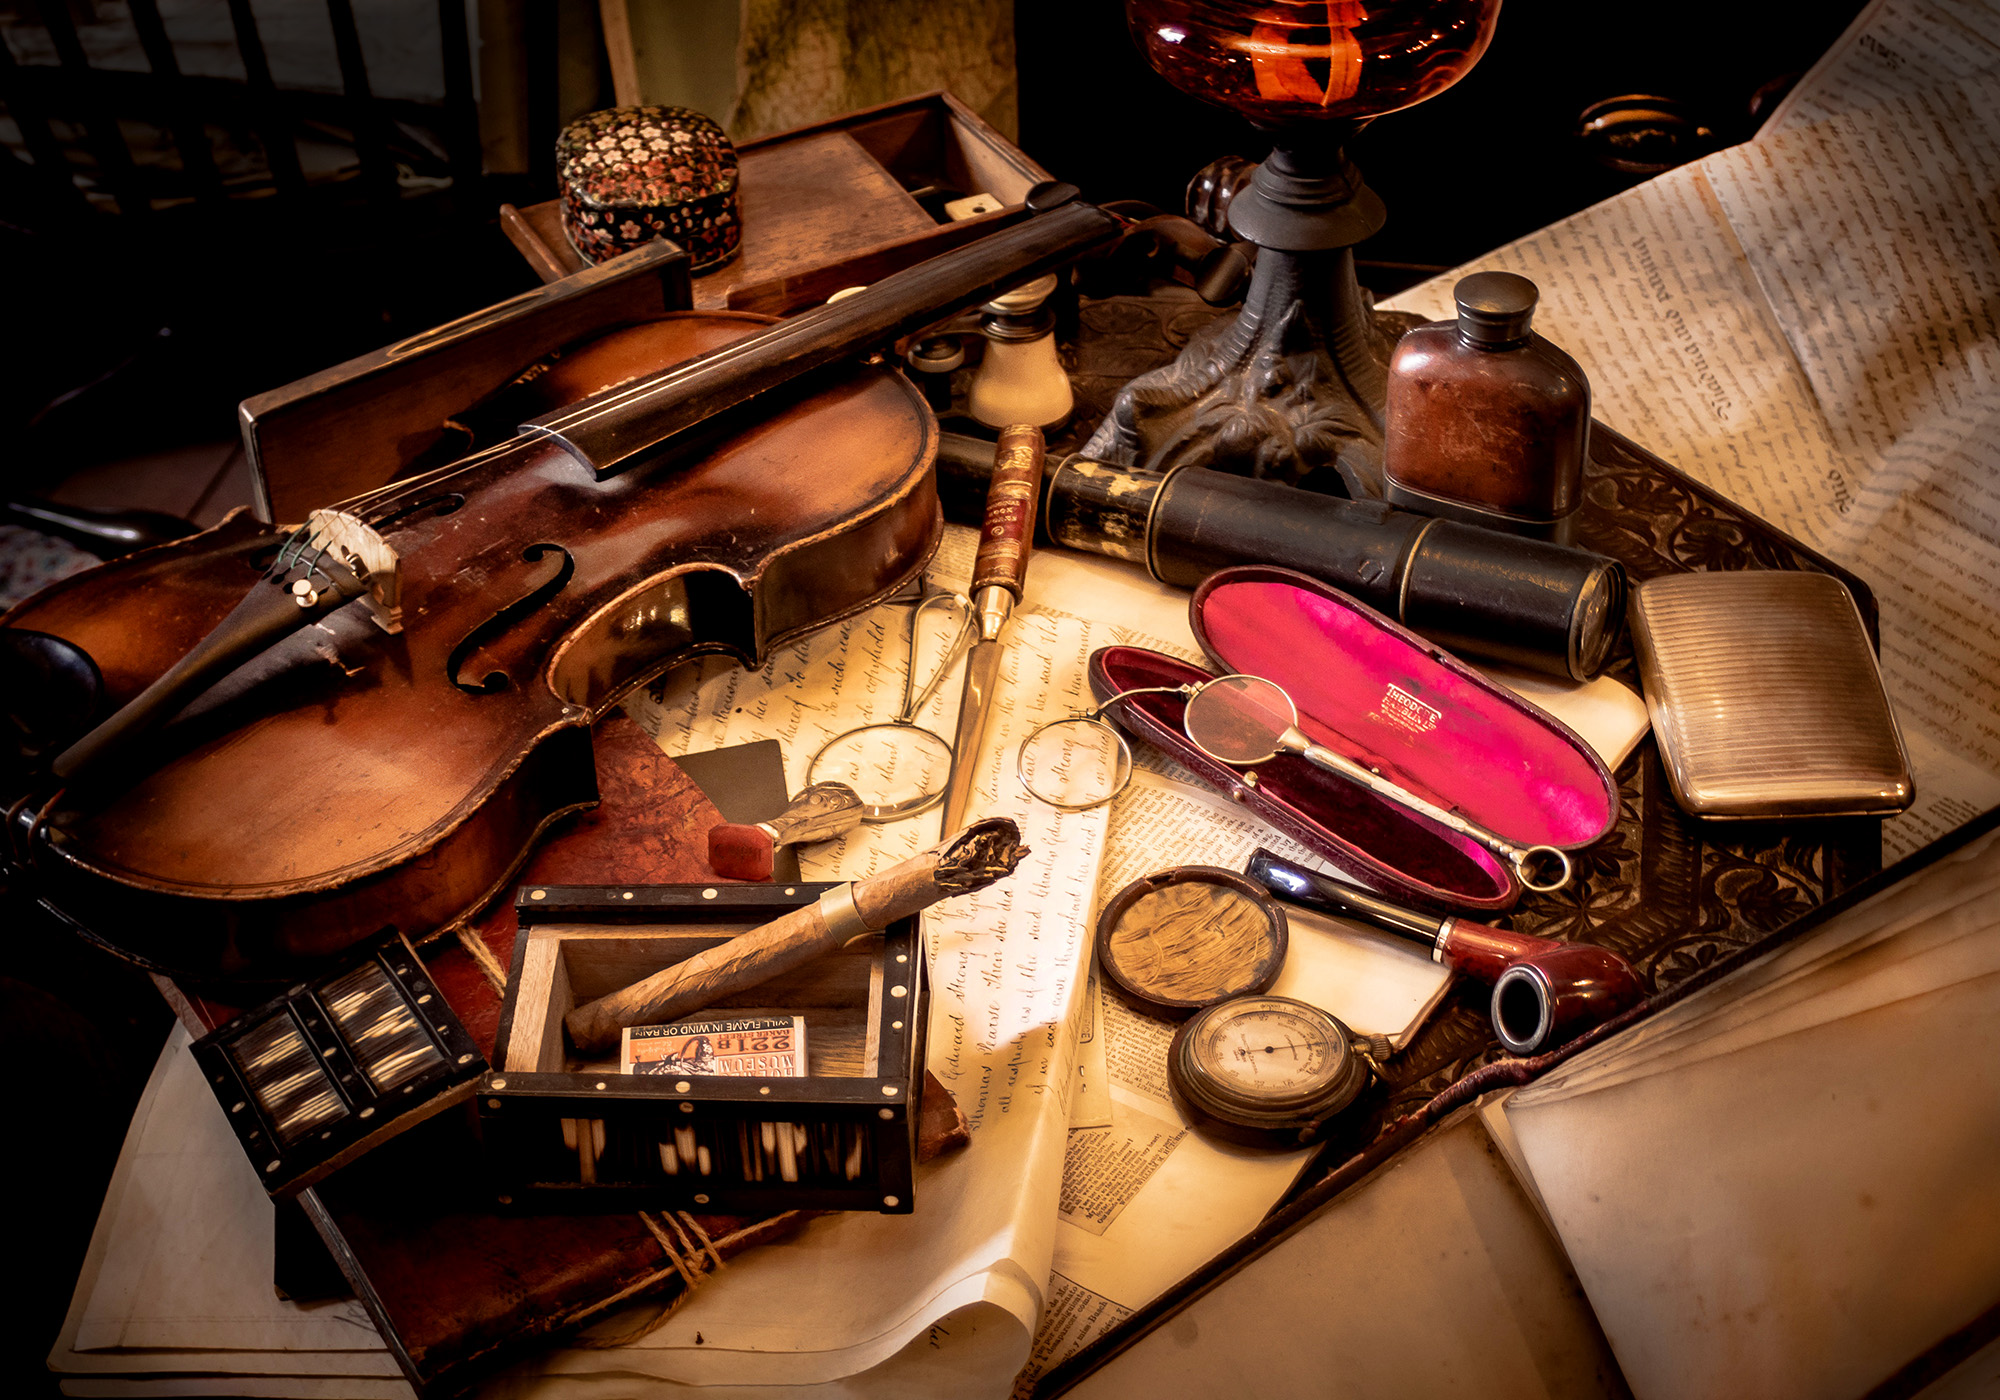 Antique violin on dimly-lit desk with old articles and objects